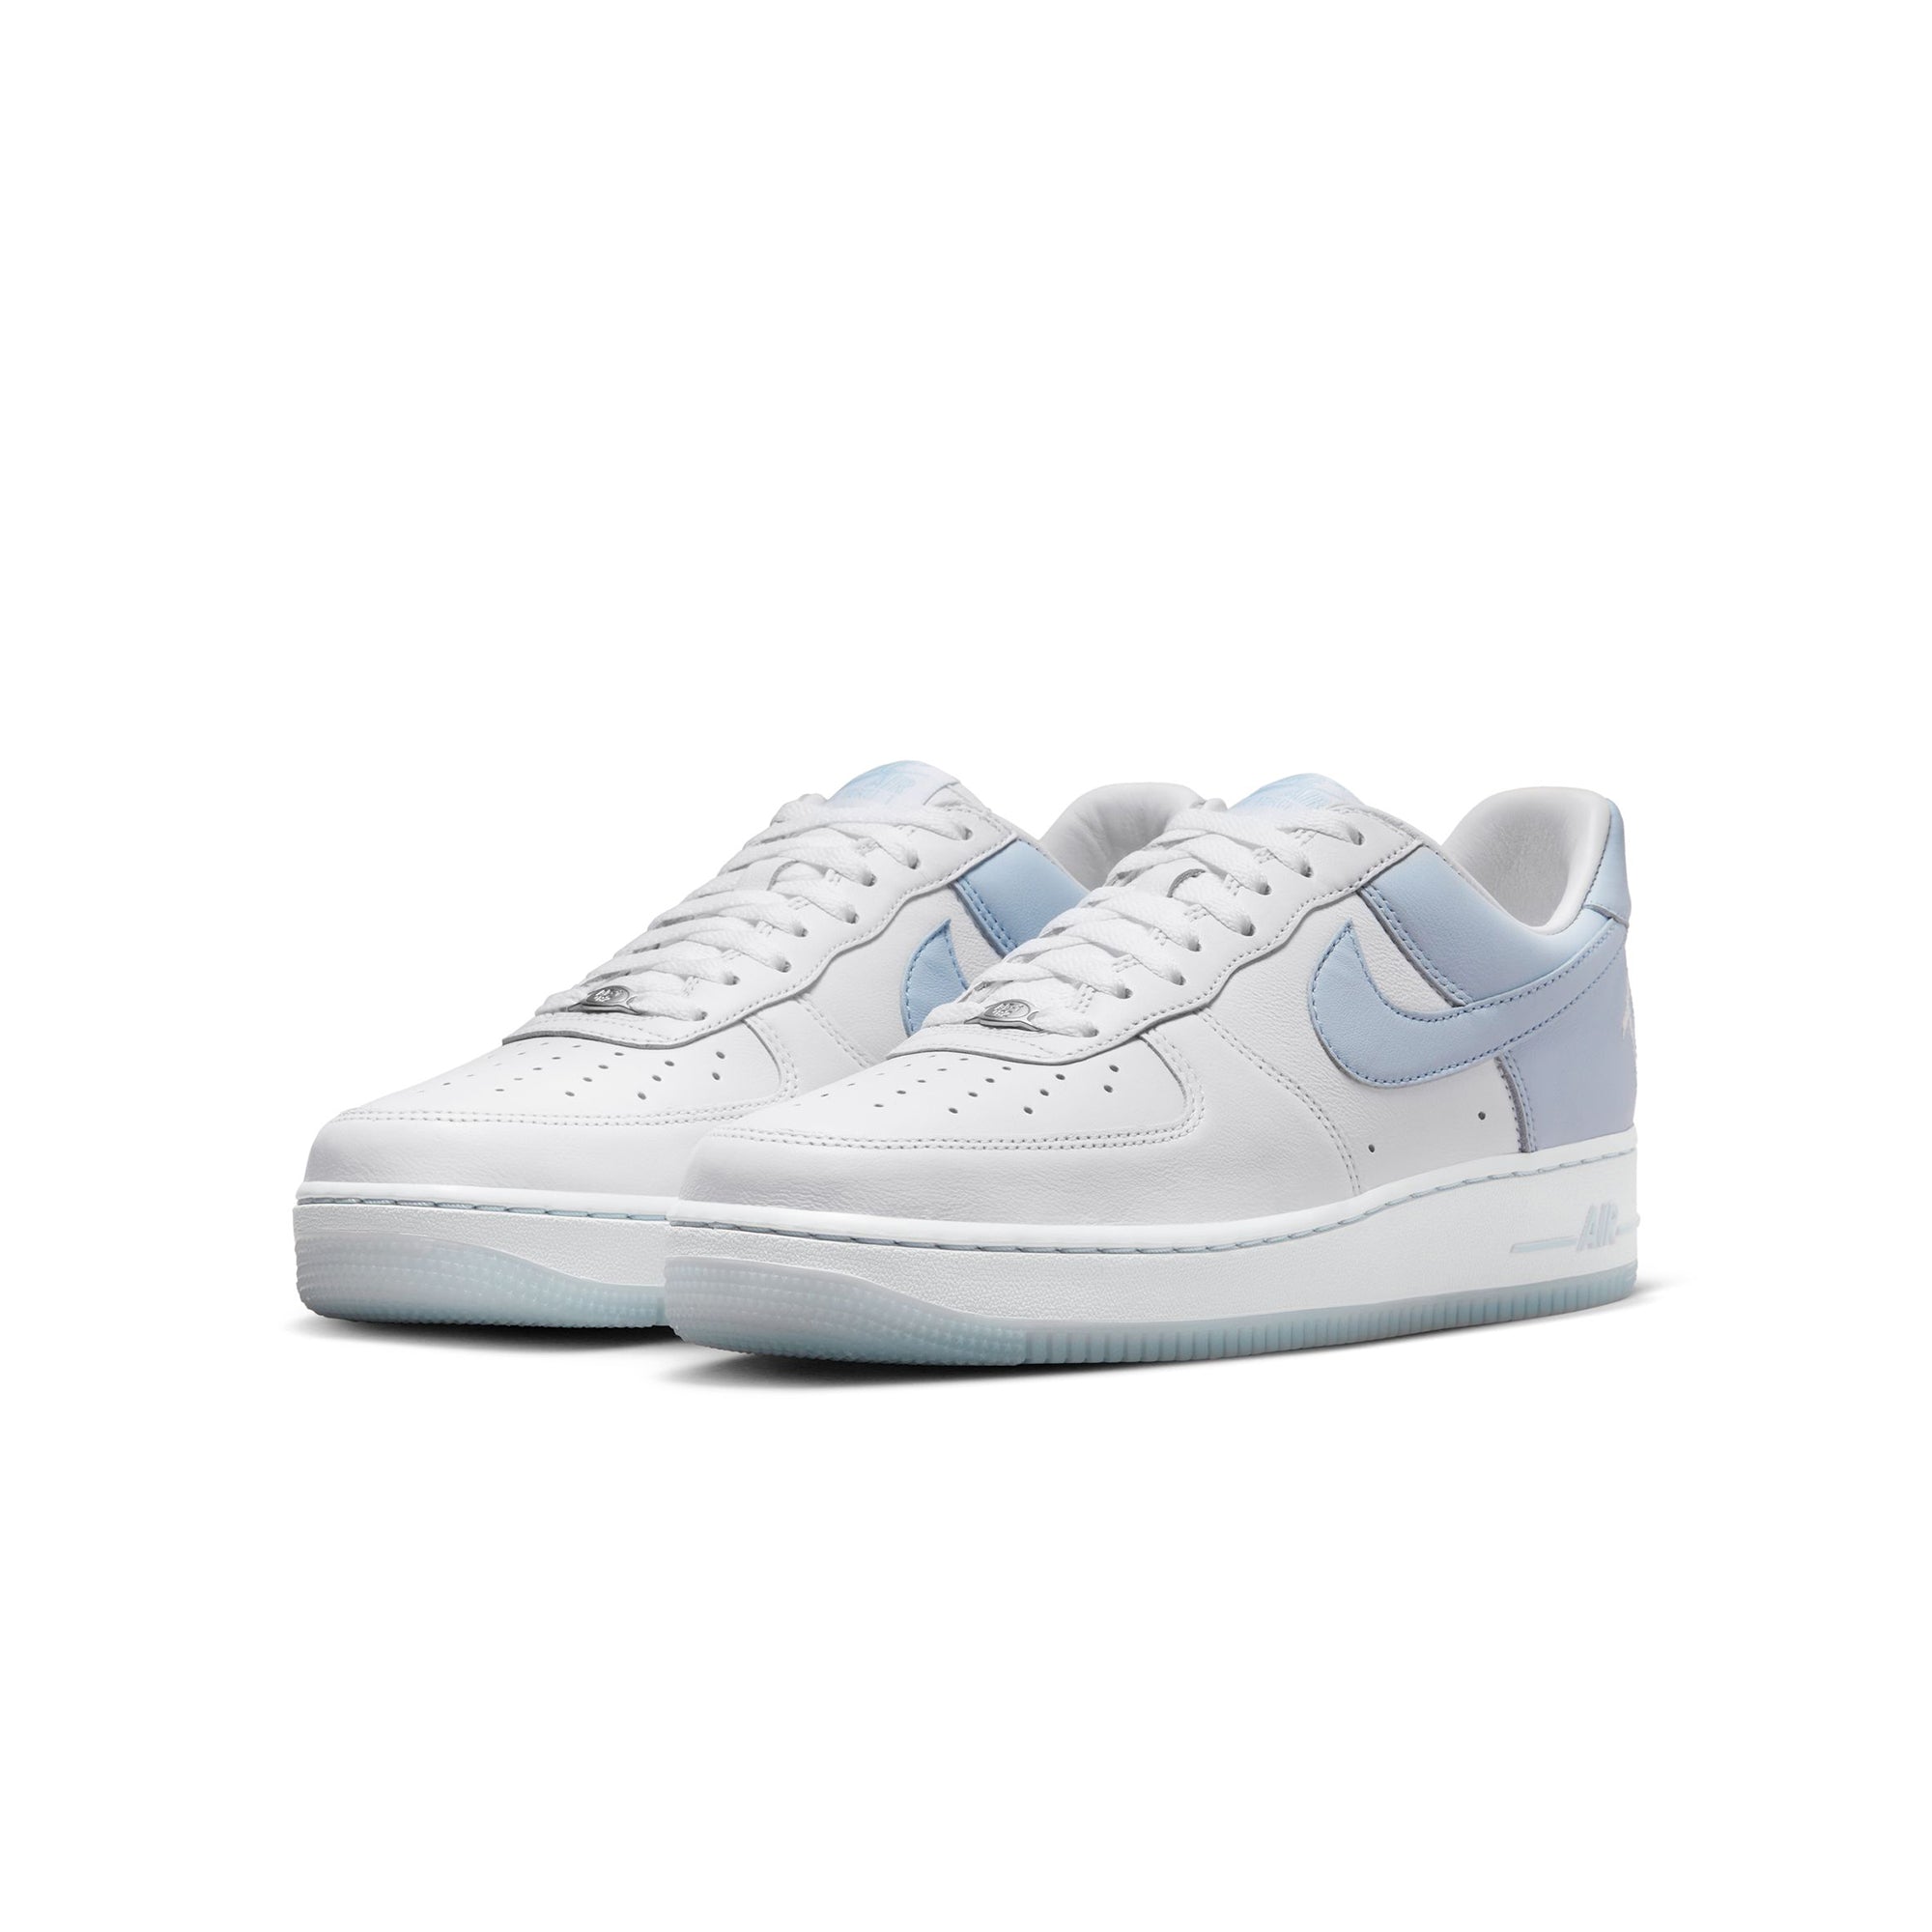 Nike x Terror Squad Air Force 1 Low QS Shoes - 4